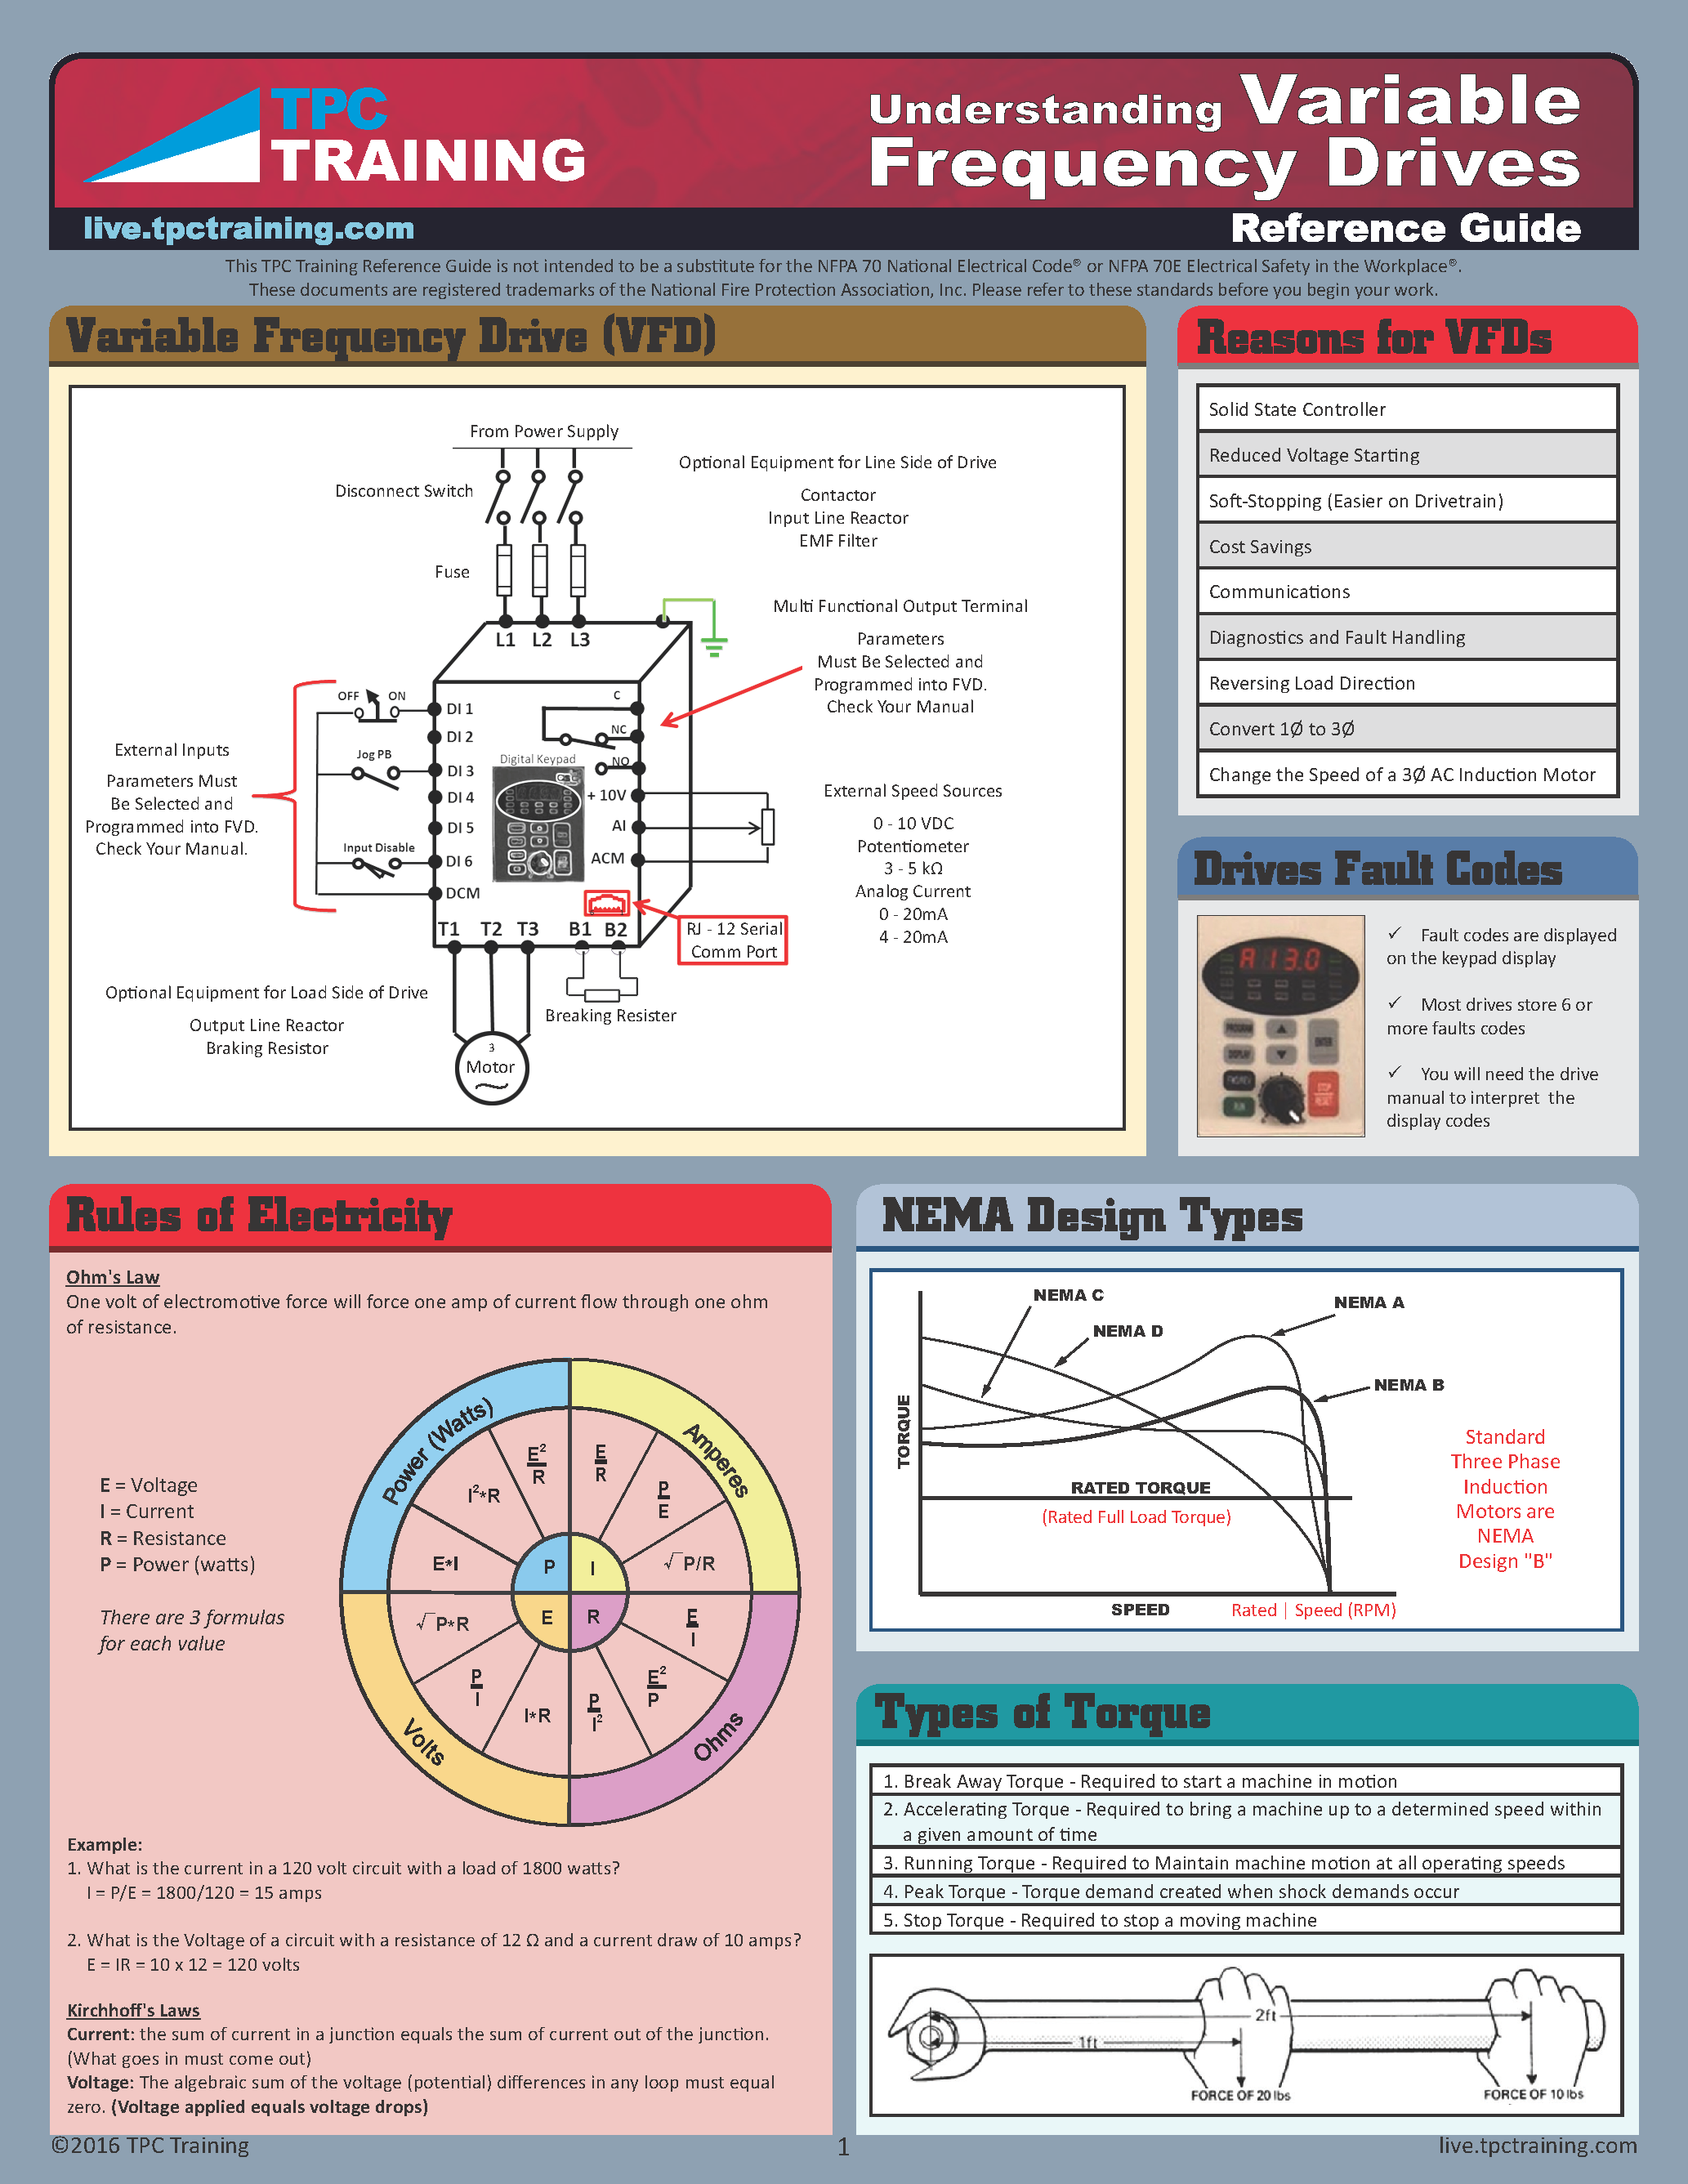 Understanding Variable Frequency Drives Reference Guide